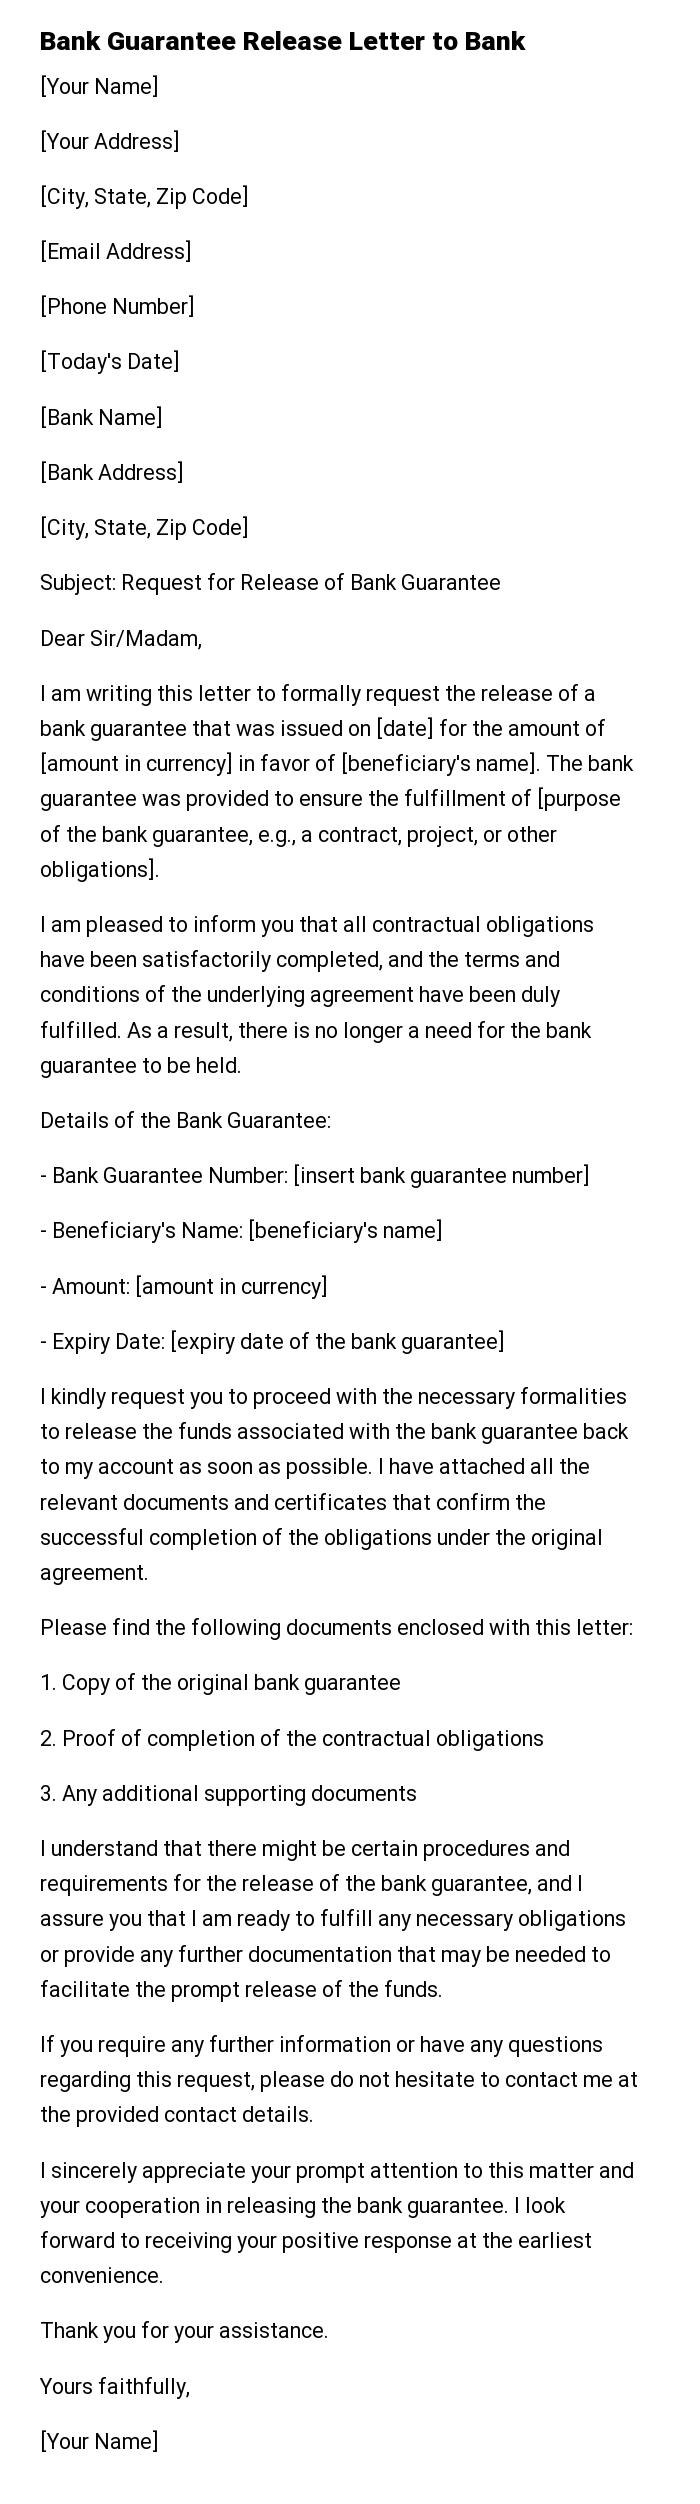 Bank Guarantee Release Letter to Bank